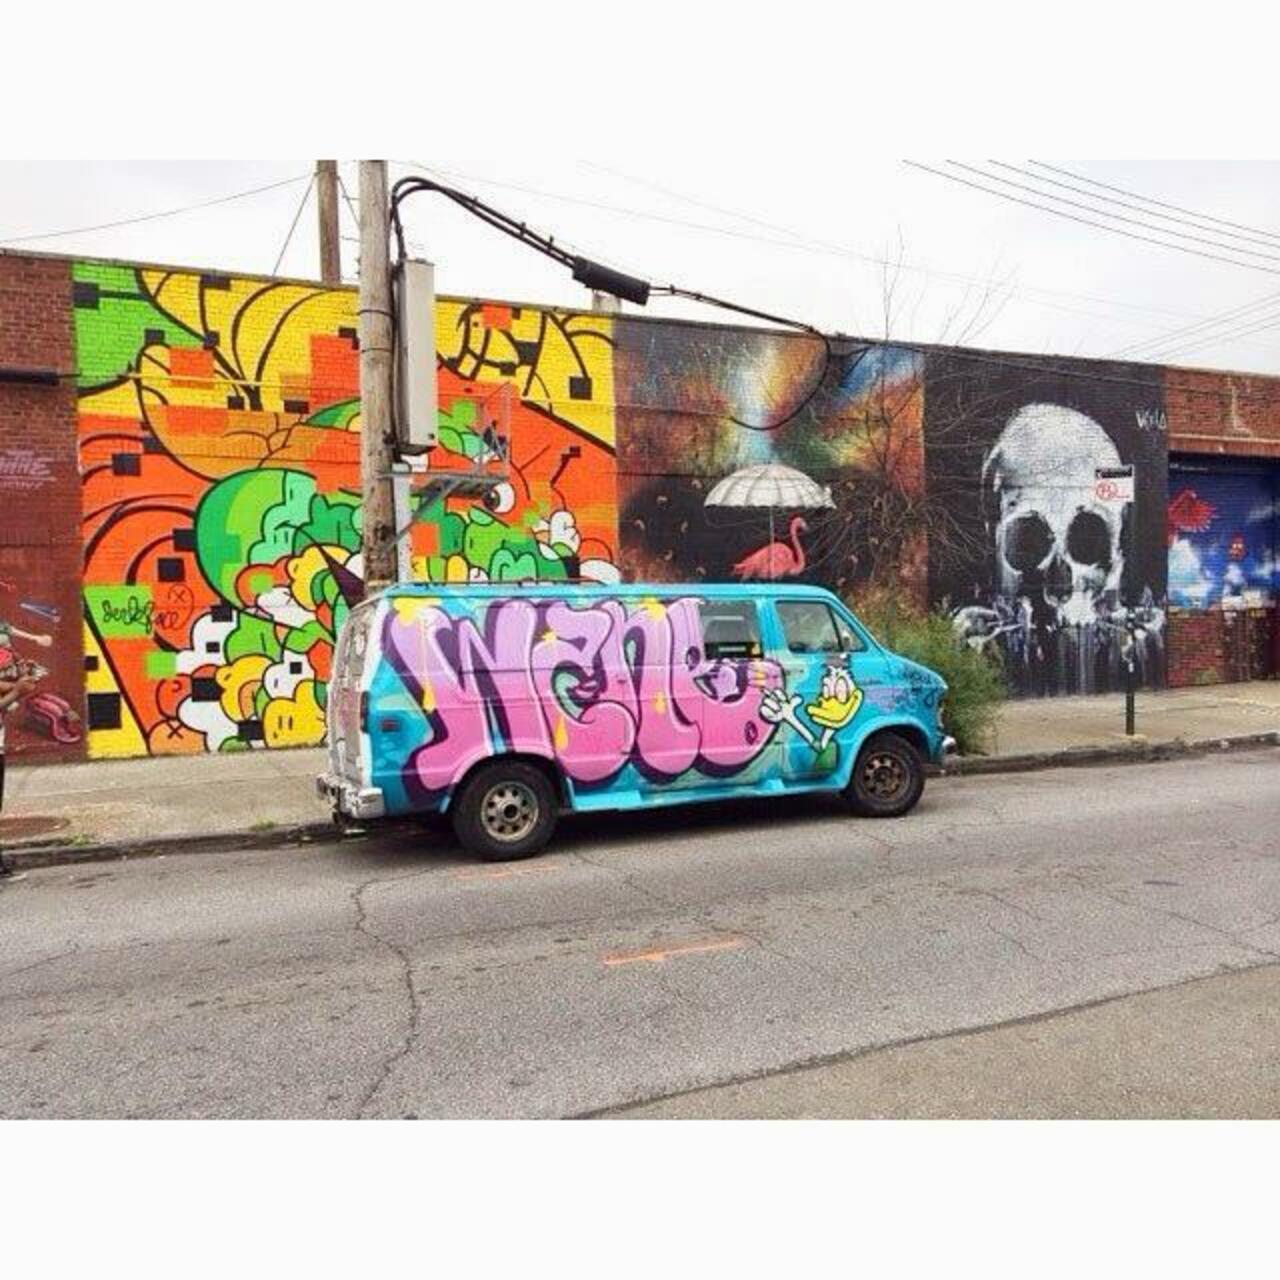 RT @False_Prophet__: I saw this van in #brooklyn . Does anyone know of the #artist ? #streetart #graffiti https://t.co/s7ccRYTH16